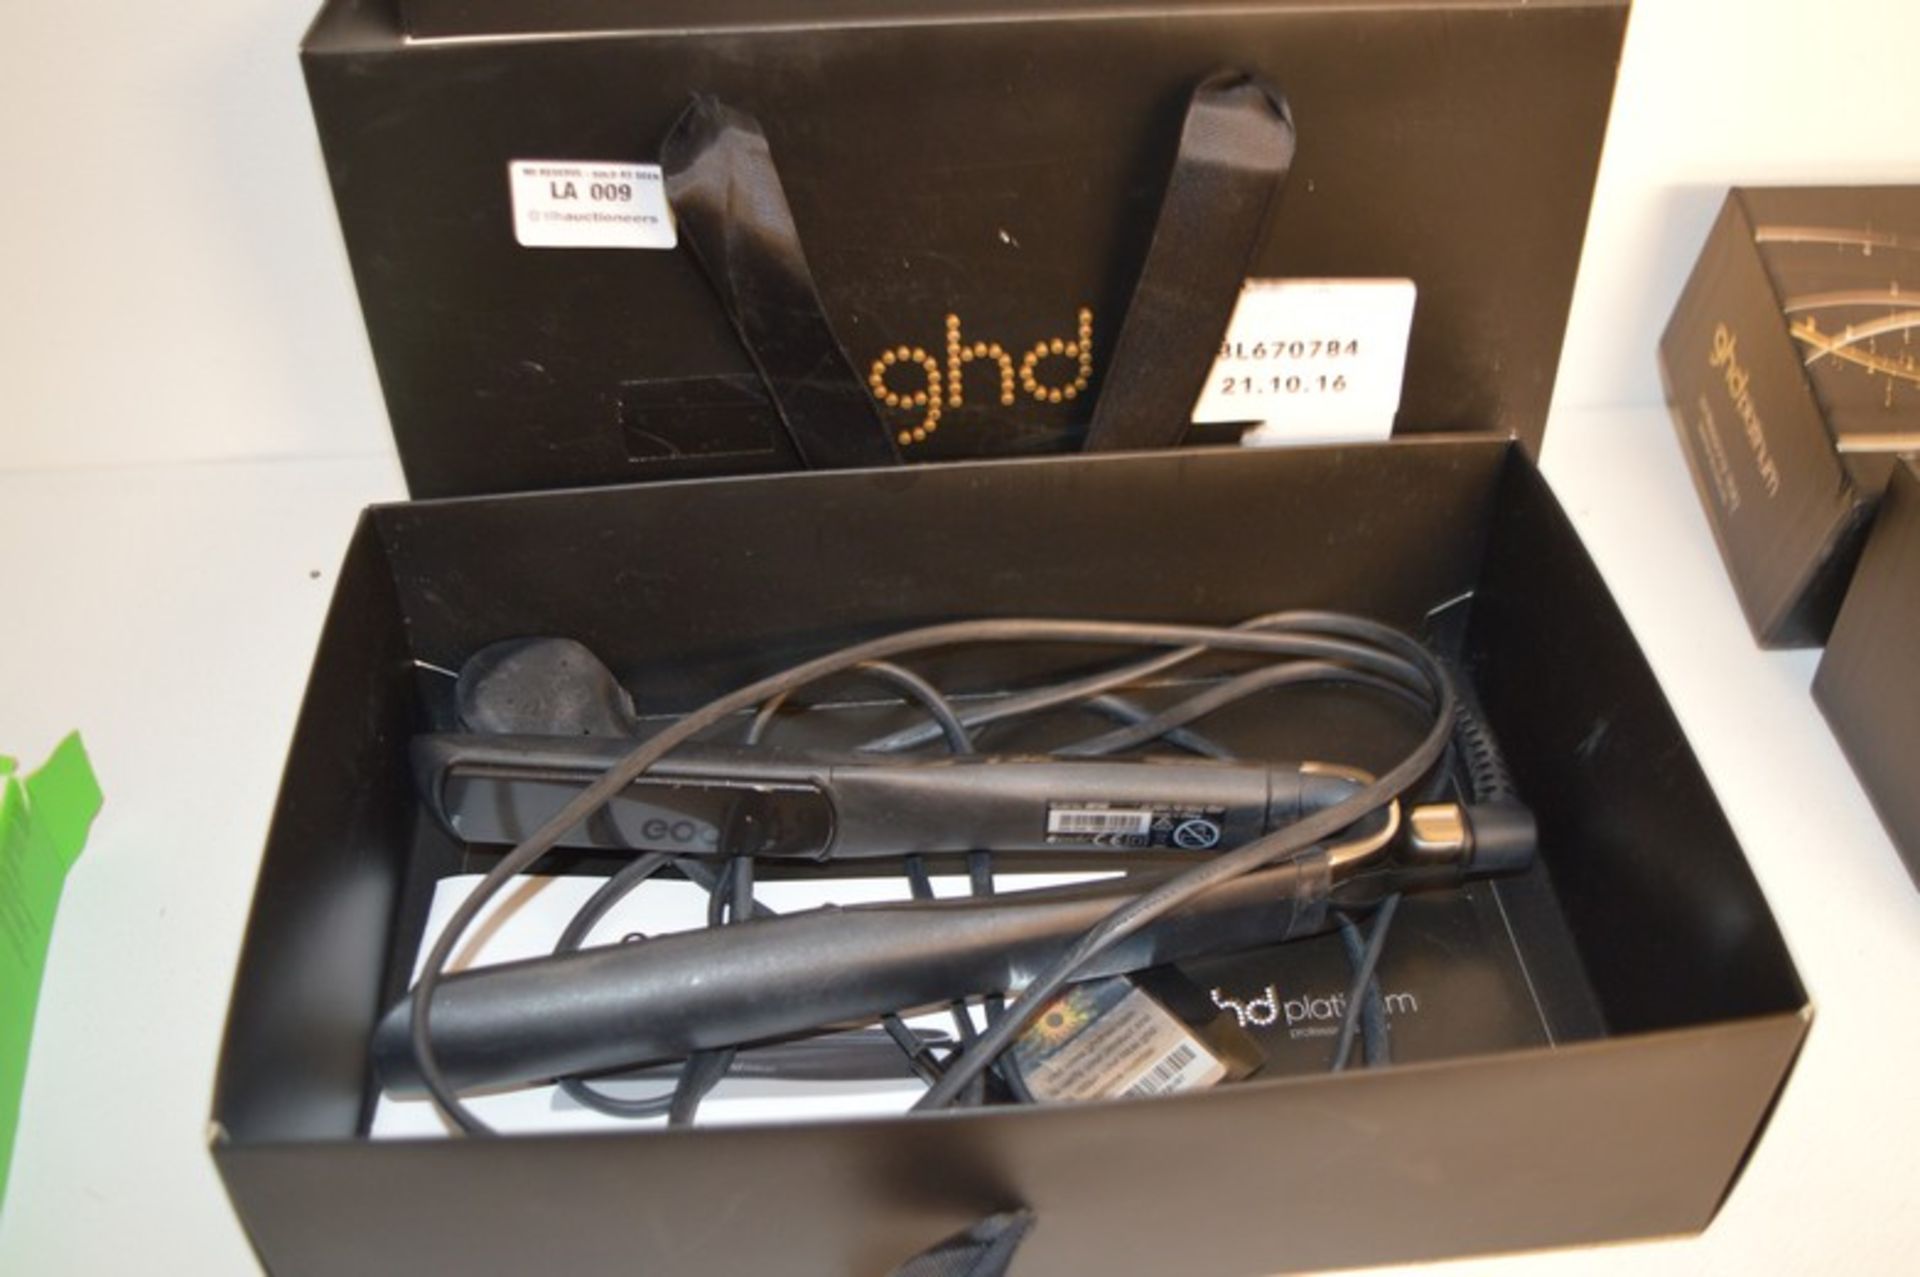 1 x BOXED GHD PLATINUM PROFESSIONAL HAIR STRAIGHTENERS RRP £145 21.10.16 *PLEASE NOTE THAT THE BID